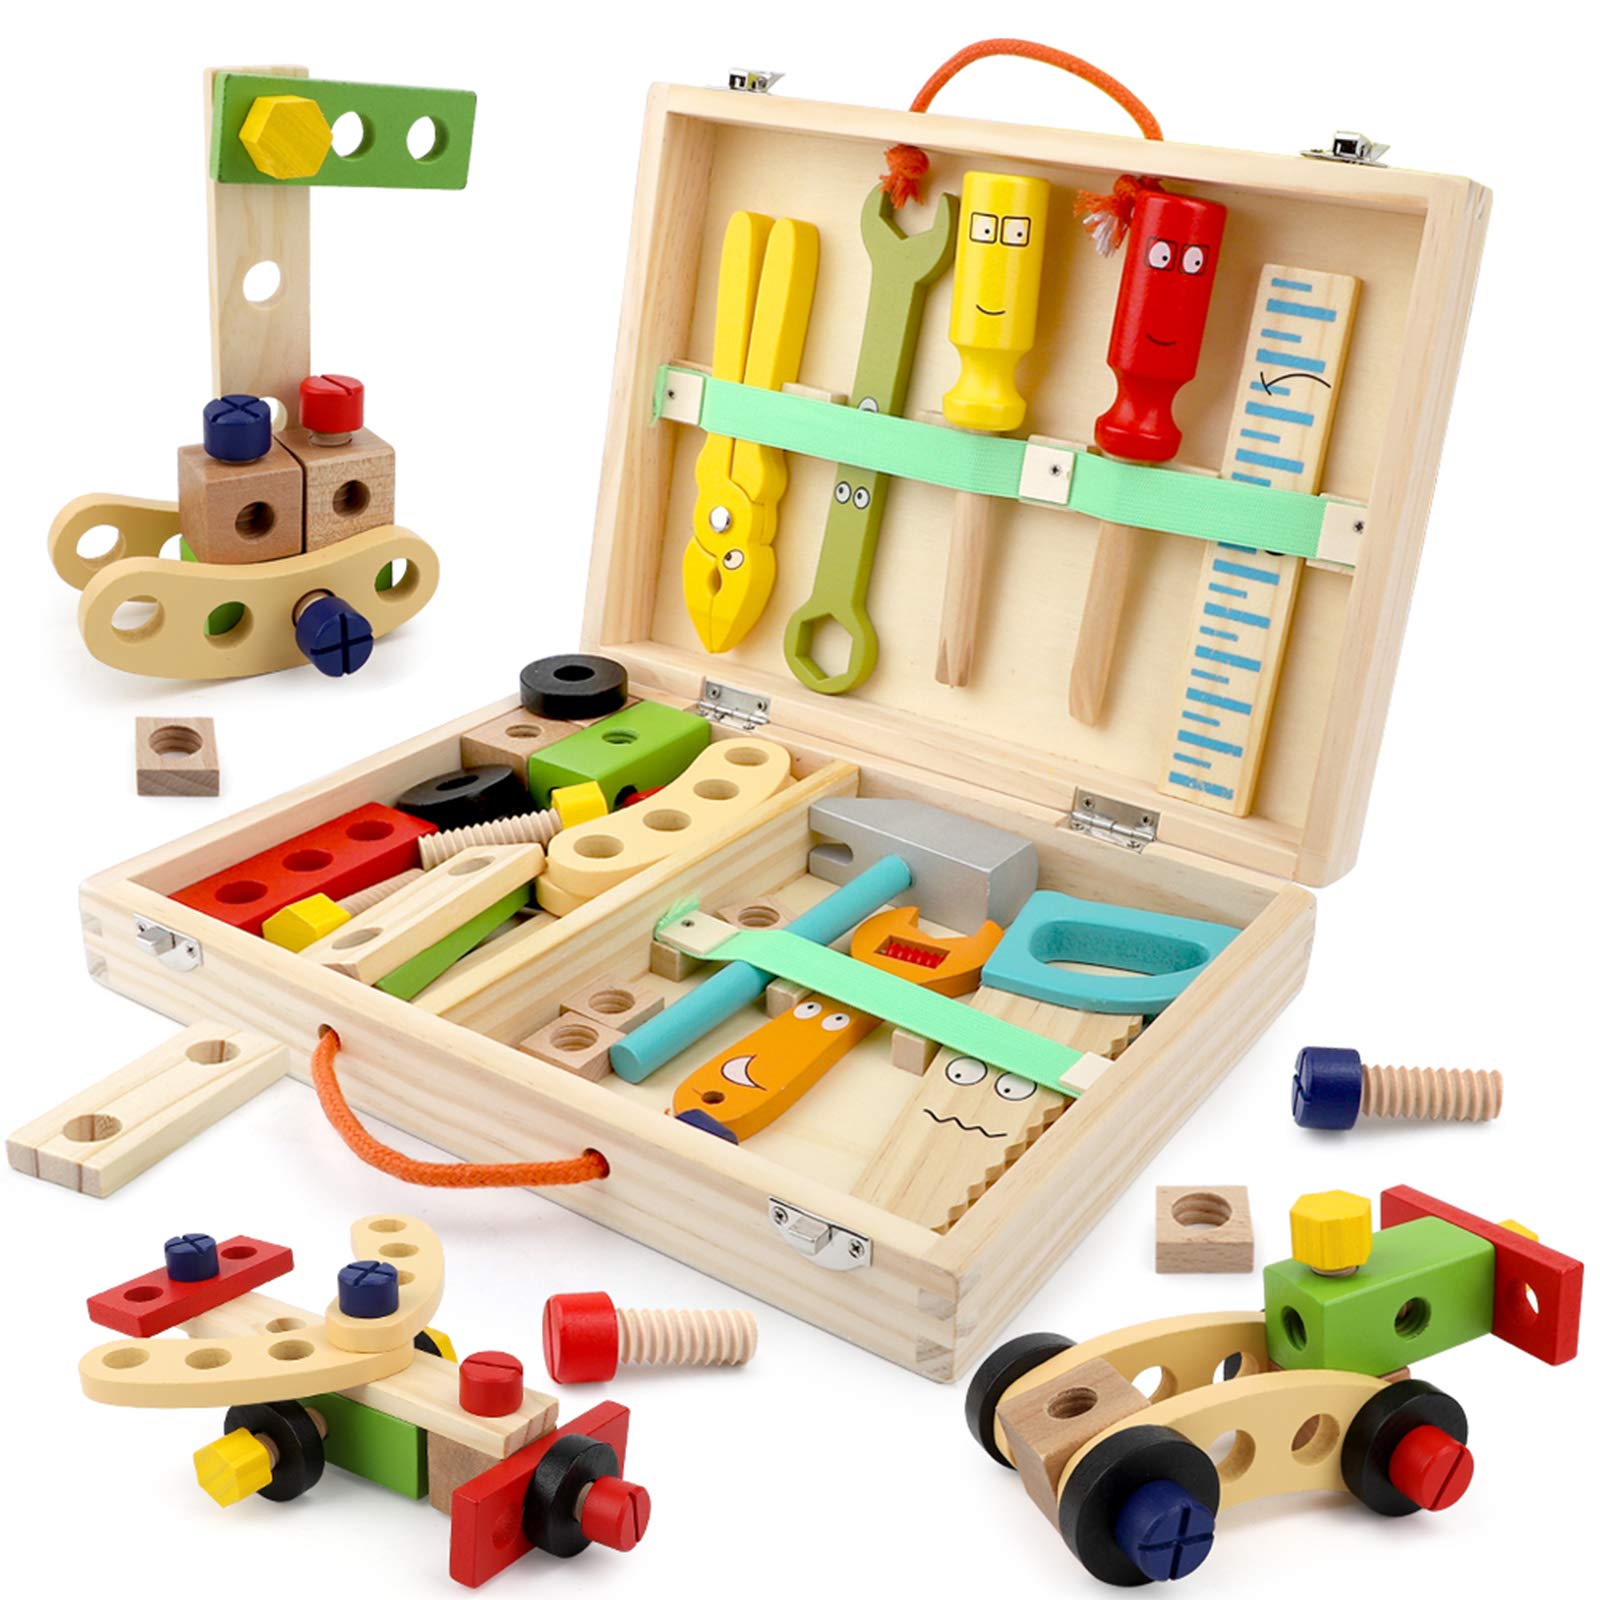 Best Price on Unfinished Wooden Toys - BeebeeRun Tool Kit for Kids Wooden Tool Box Set with Colorful Tools Pretend Play Toys Gifts for Toddlers Boys Girls Educational Construction Toy – Ealing